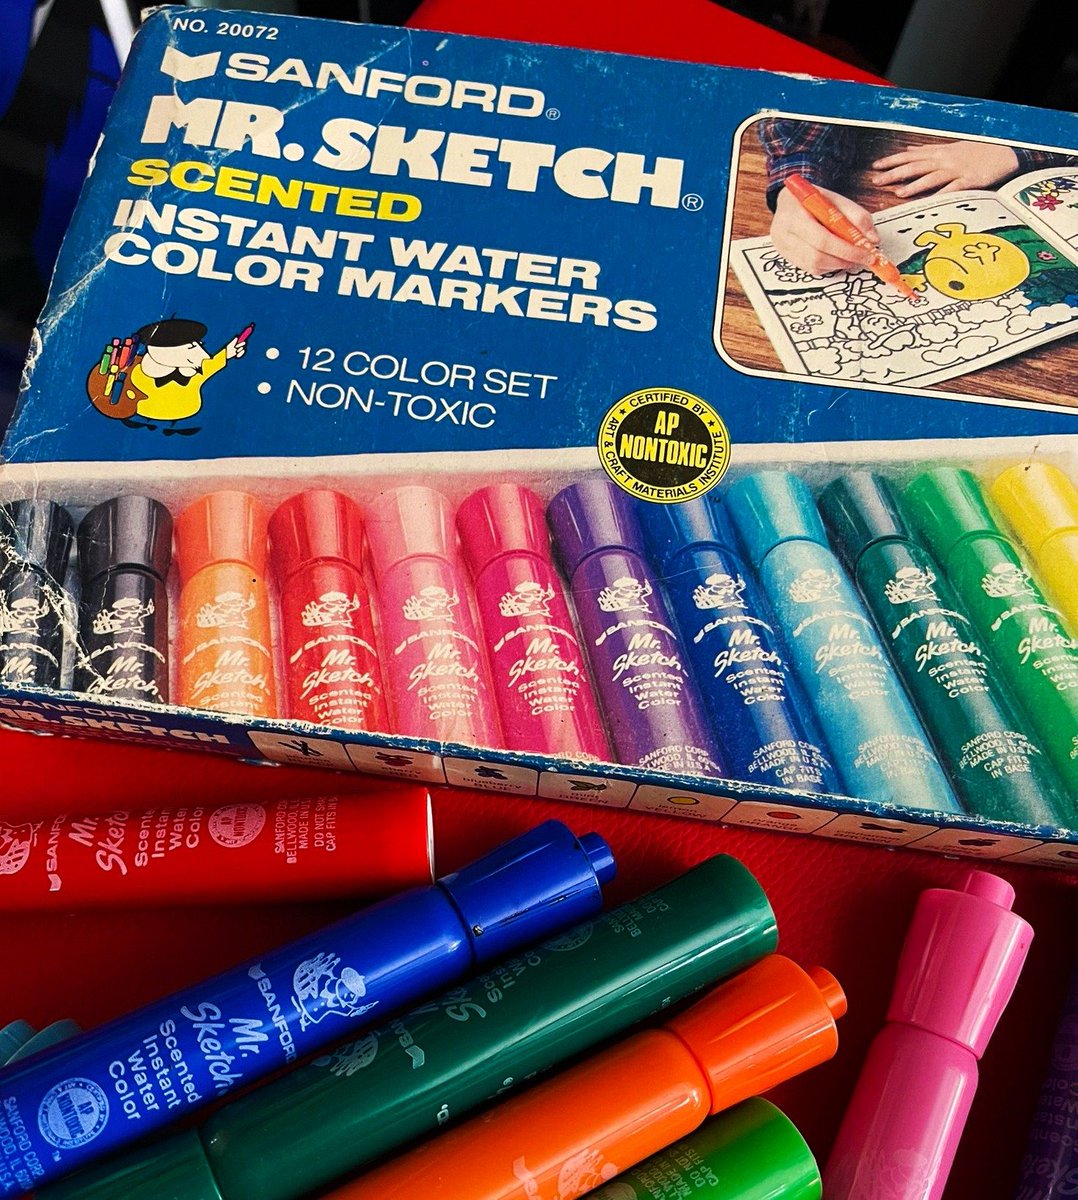 A box of Mr. Sketch scented markers was the childhood equivalent of a wine tasting.